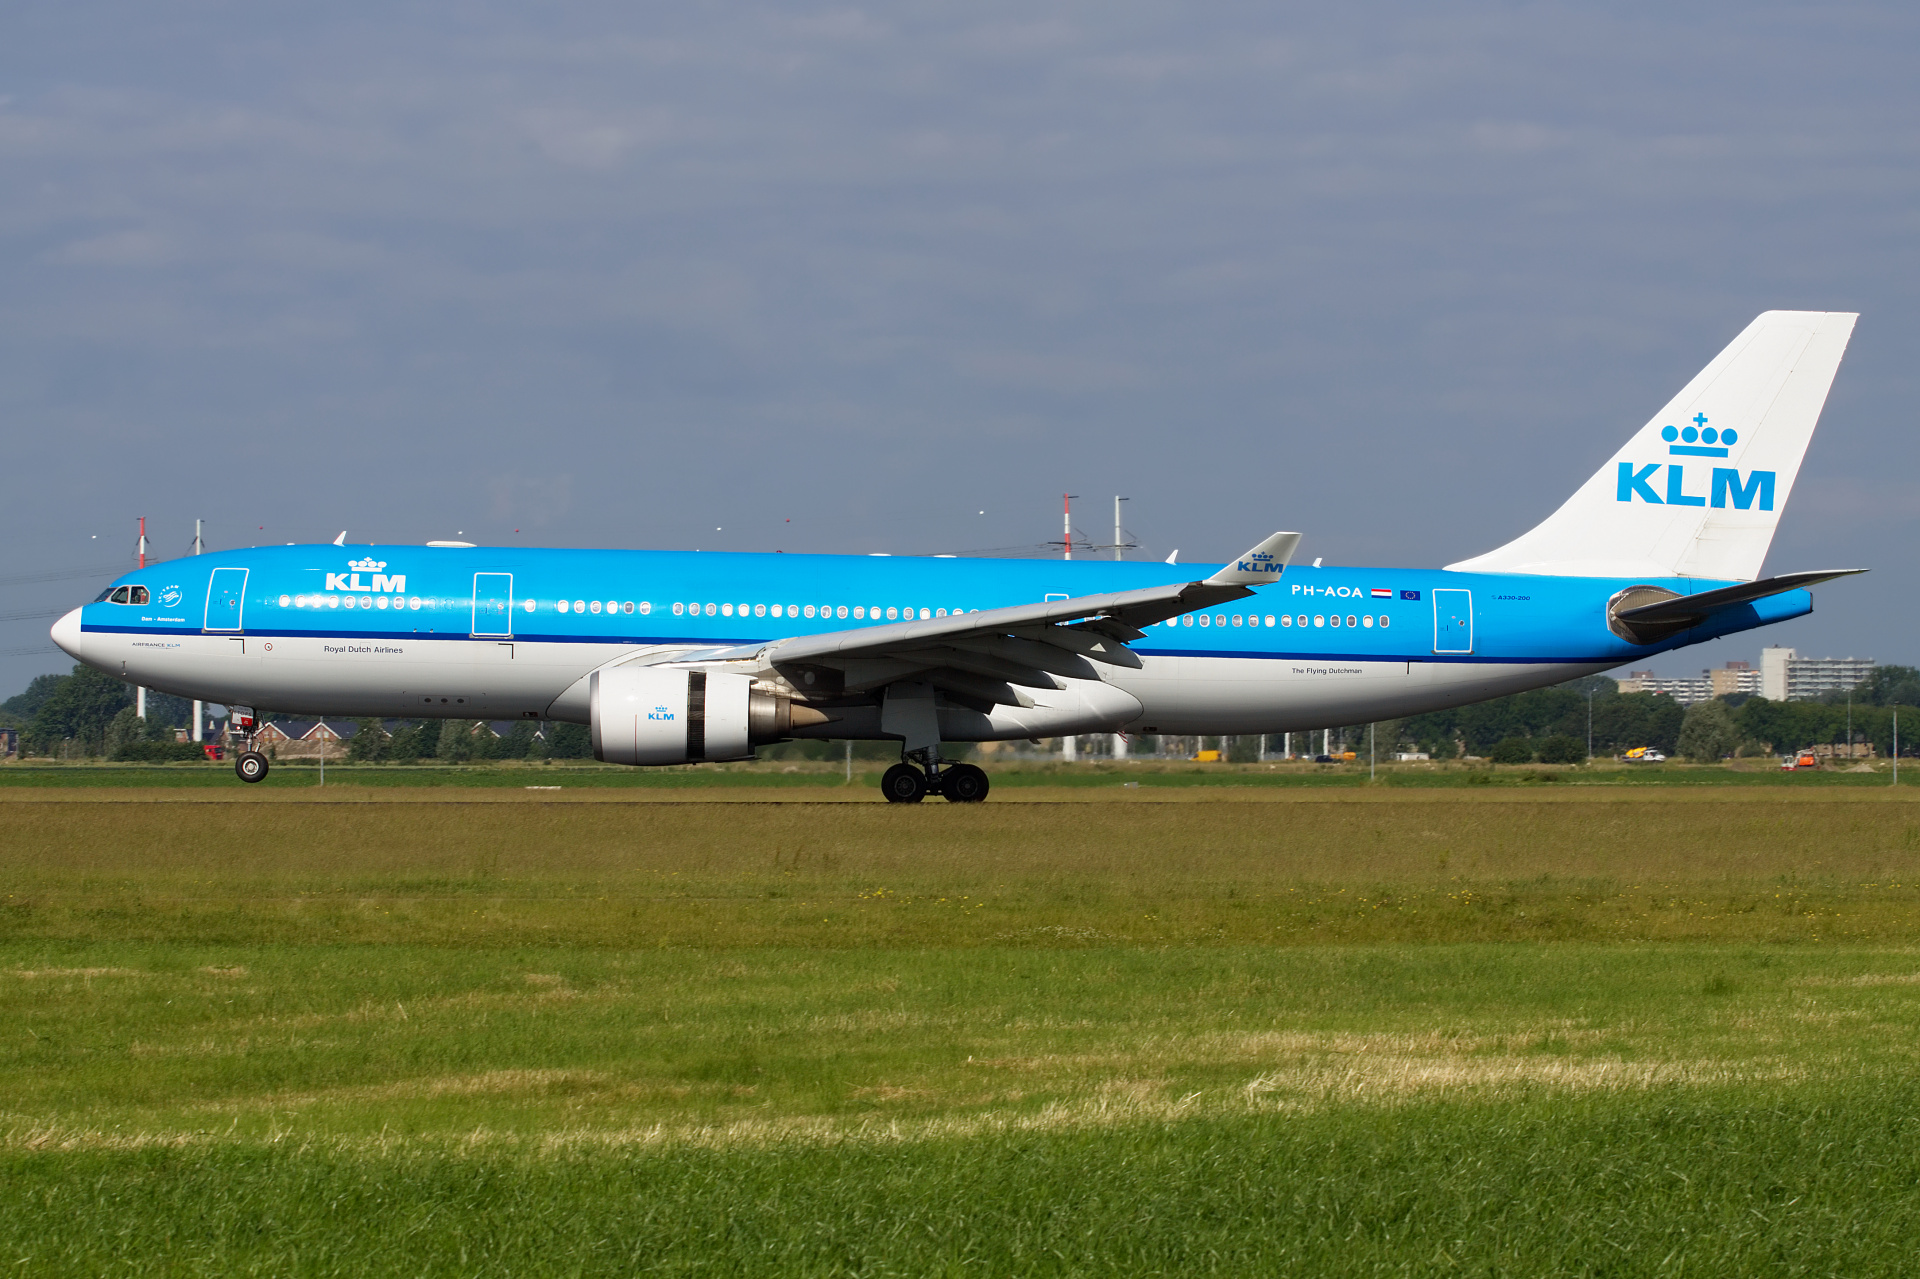 PH-AOA (Aircraft » Schiphol Spotting » Airbus A330-200 » KLM Royal Dutch Airlines)